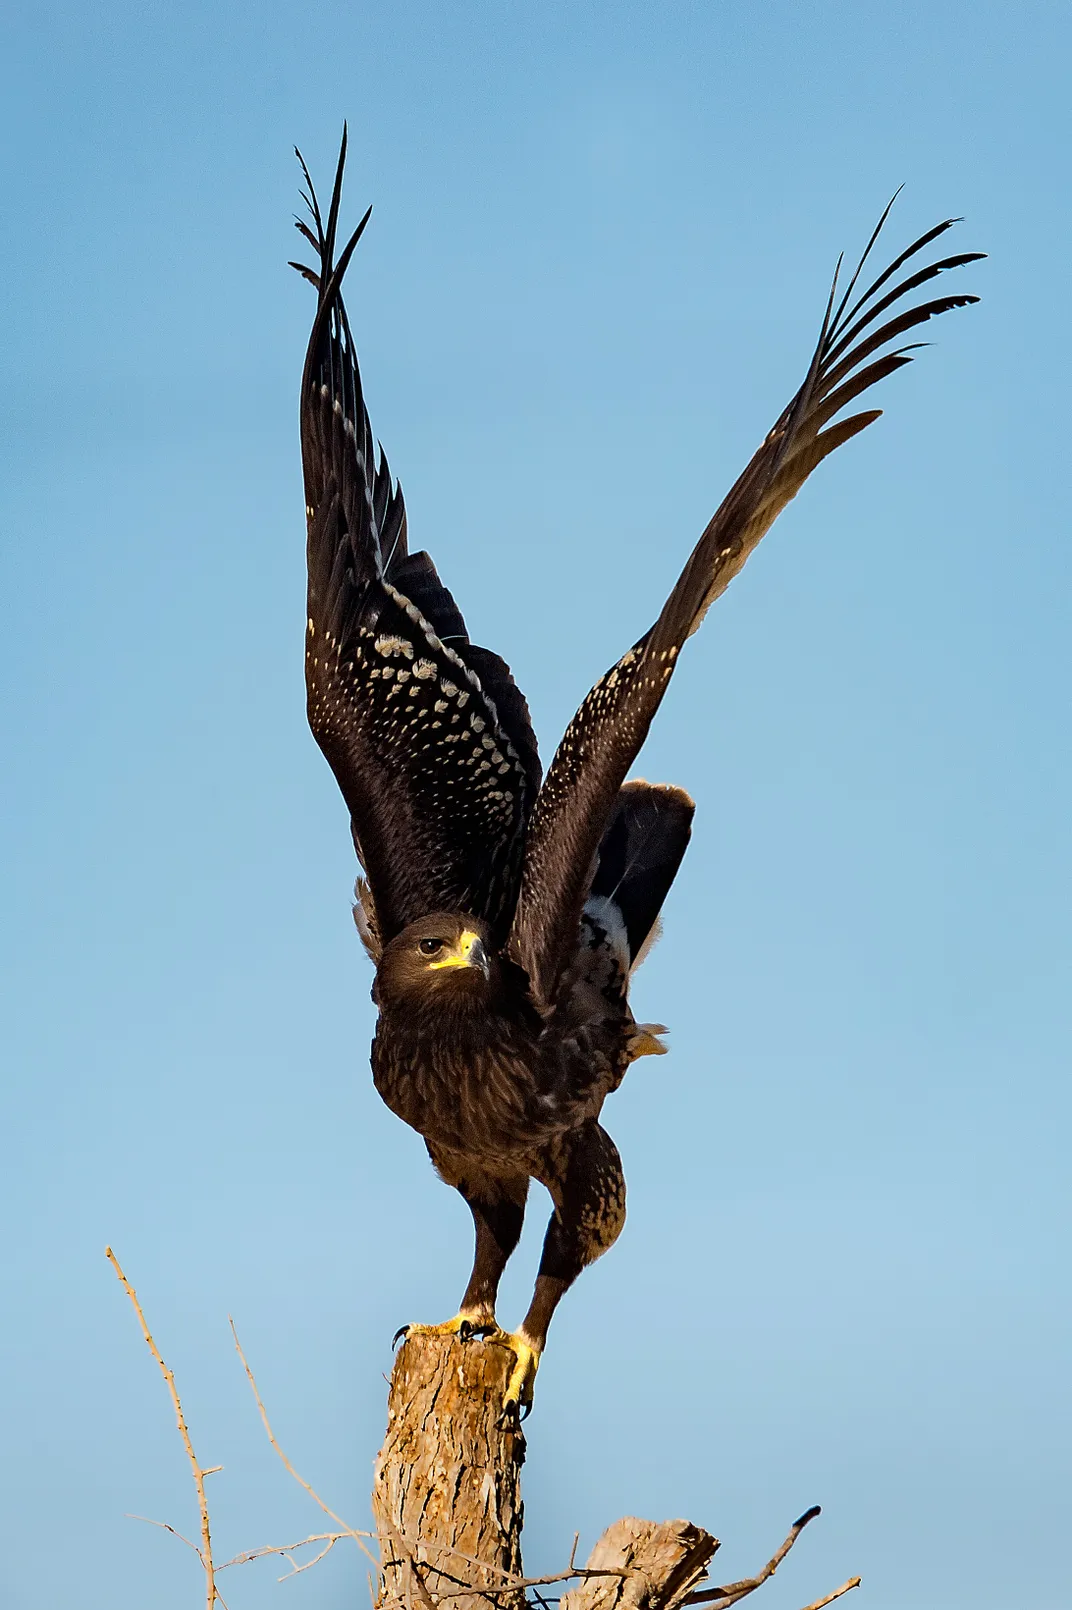 a large, brown eagle with spots on the backs of its wings stands on top of a tall and thin tree stump, looking left and with its wings up above its head, a blue sky in the background